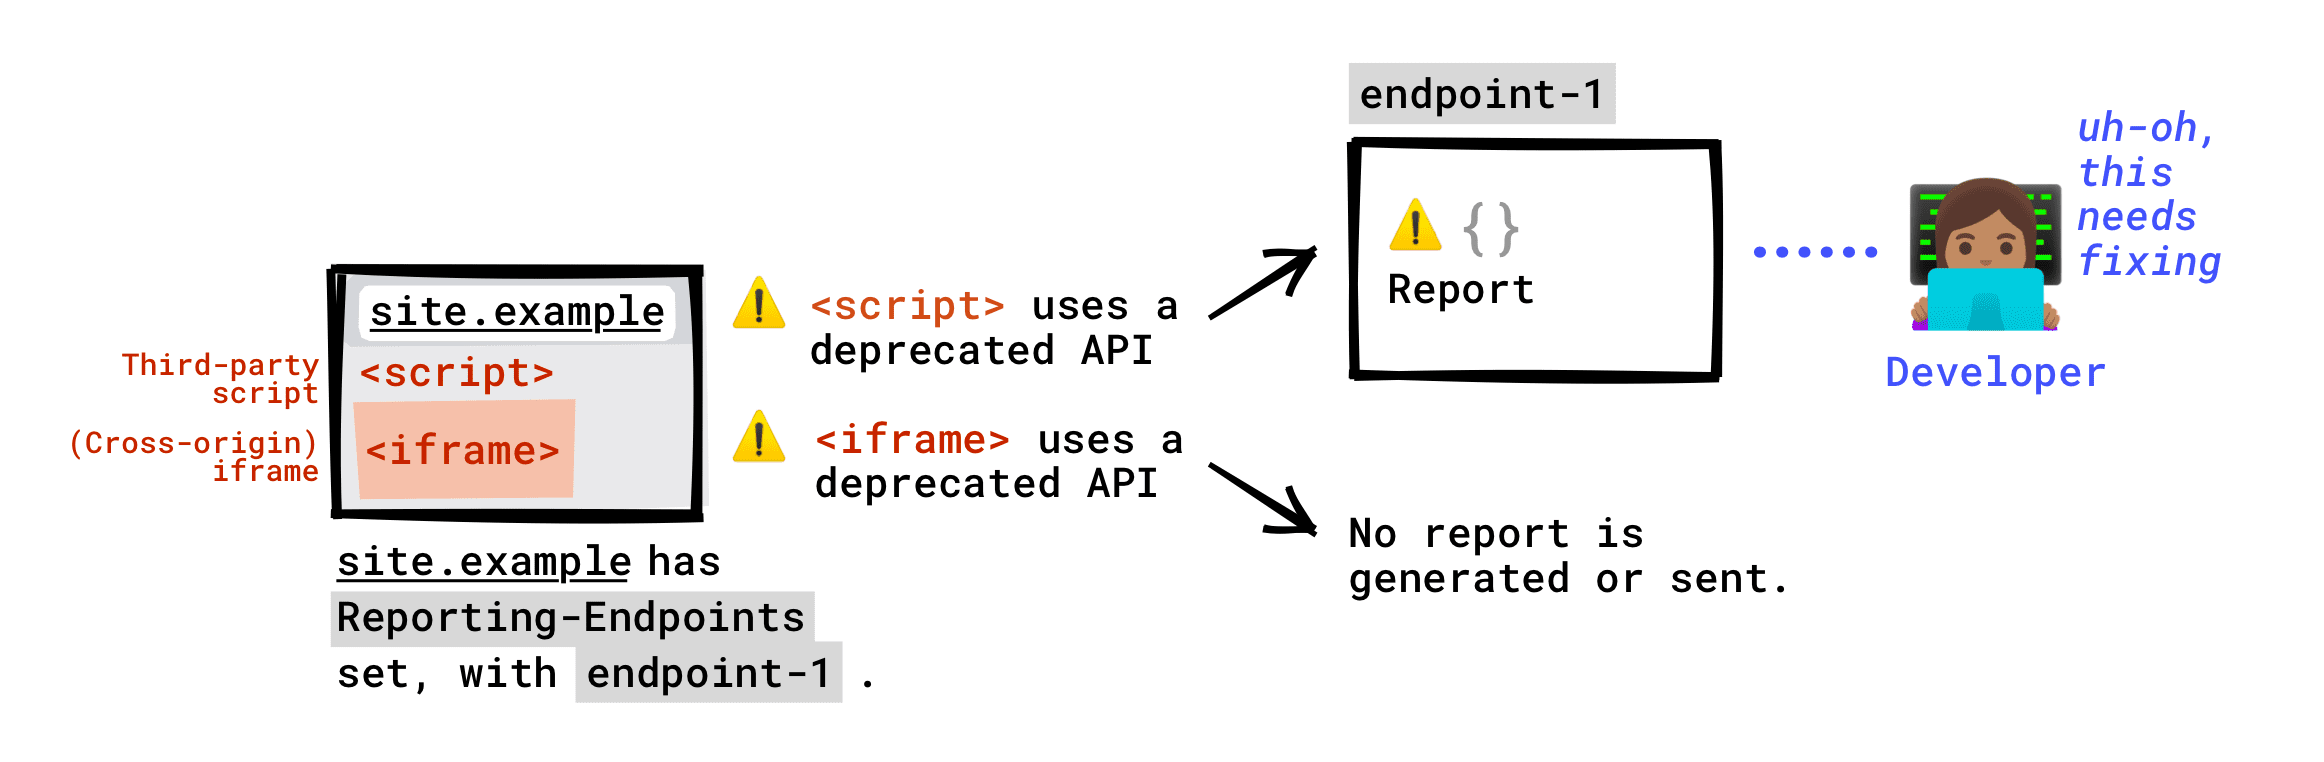 If the Reporting-Endpoints header is set up on your page: deprecated API called by third-party scripts running on your page will be reported to your endpoint. Deprecated API called by an iframe embedded in your page will not be reported to your endpoint. A deprecation report will be generated only if the iframe server has set up Reporting-Endpoints, and this report will be sent to whichever endpoint the iframe's server has set up.